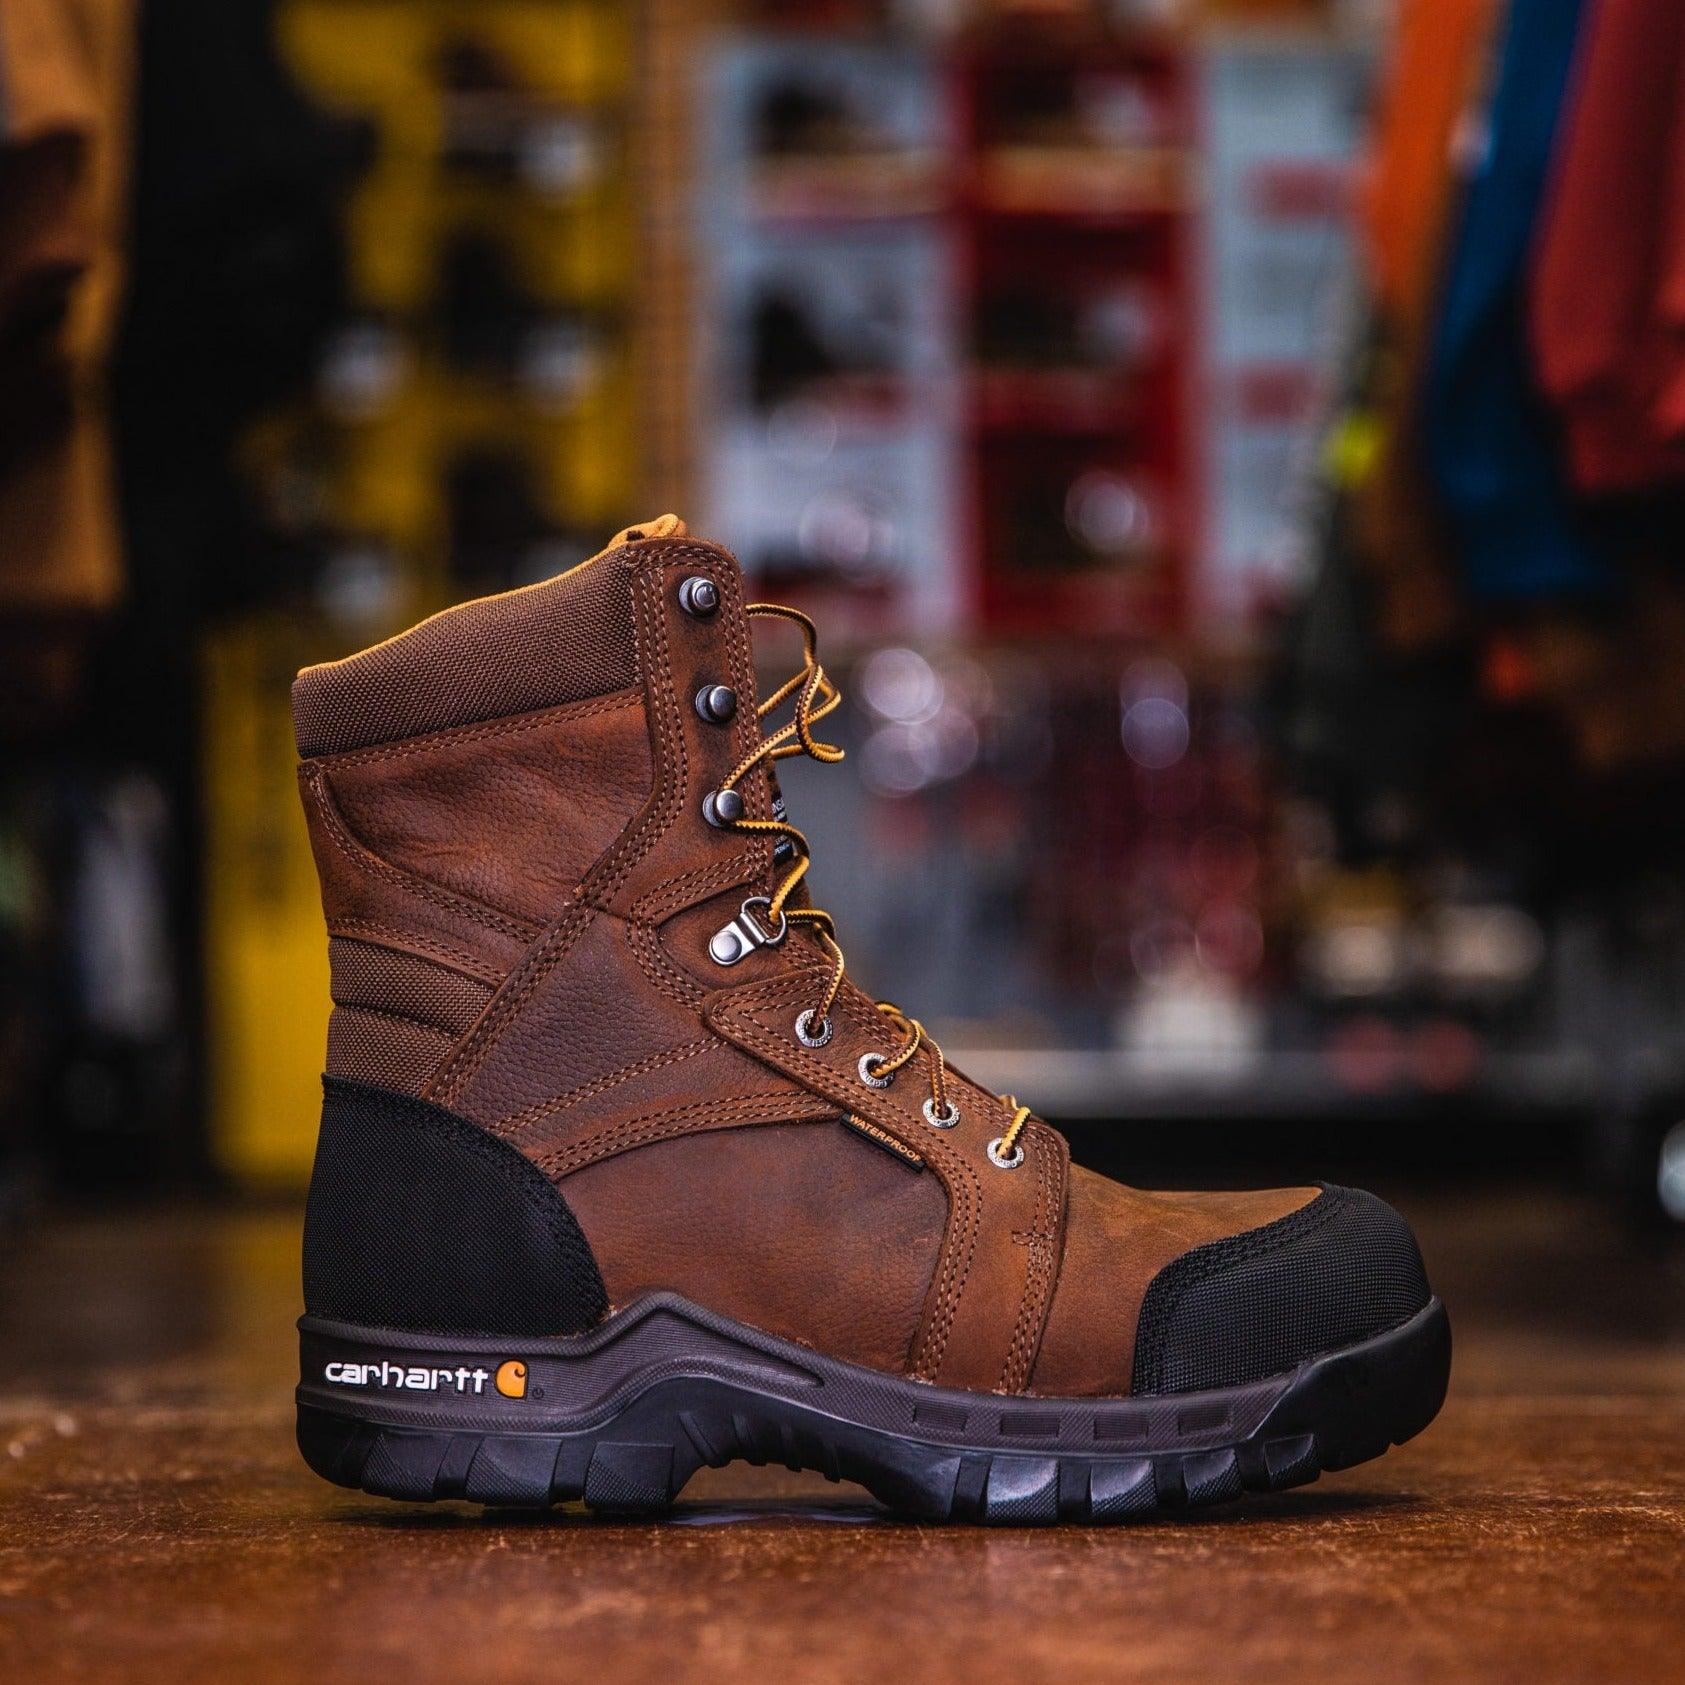 Men's CMF8389 Comp Toe Insulated Work Boots - Purpose-Built / Home of the Trades